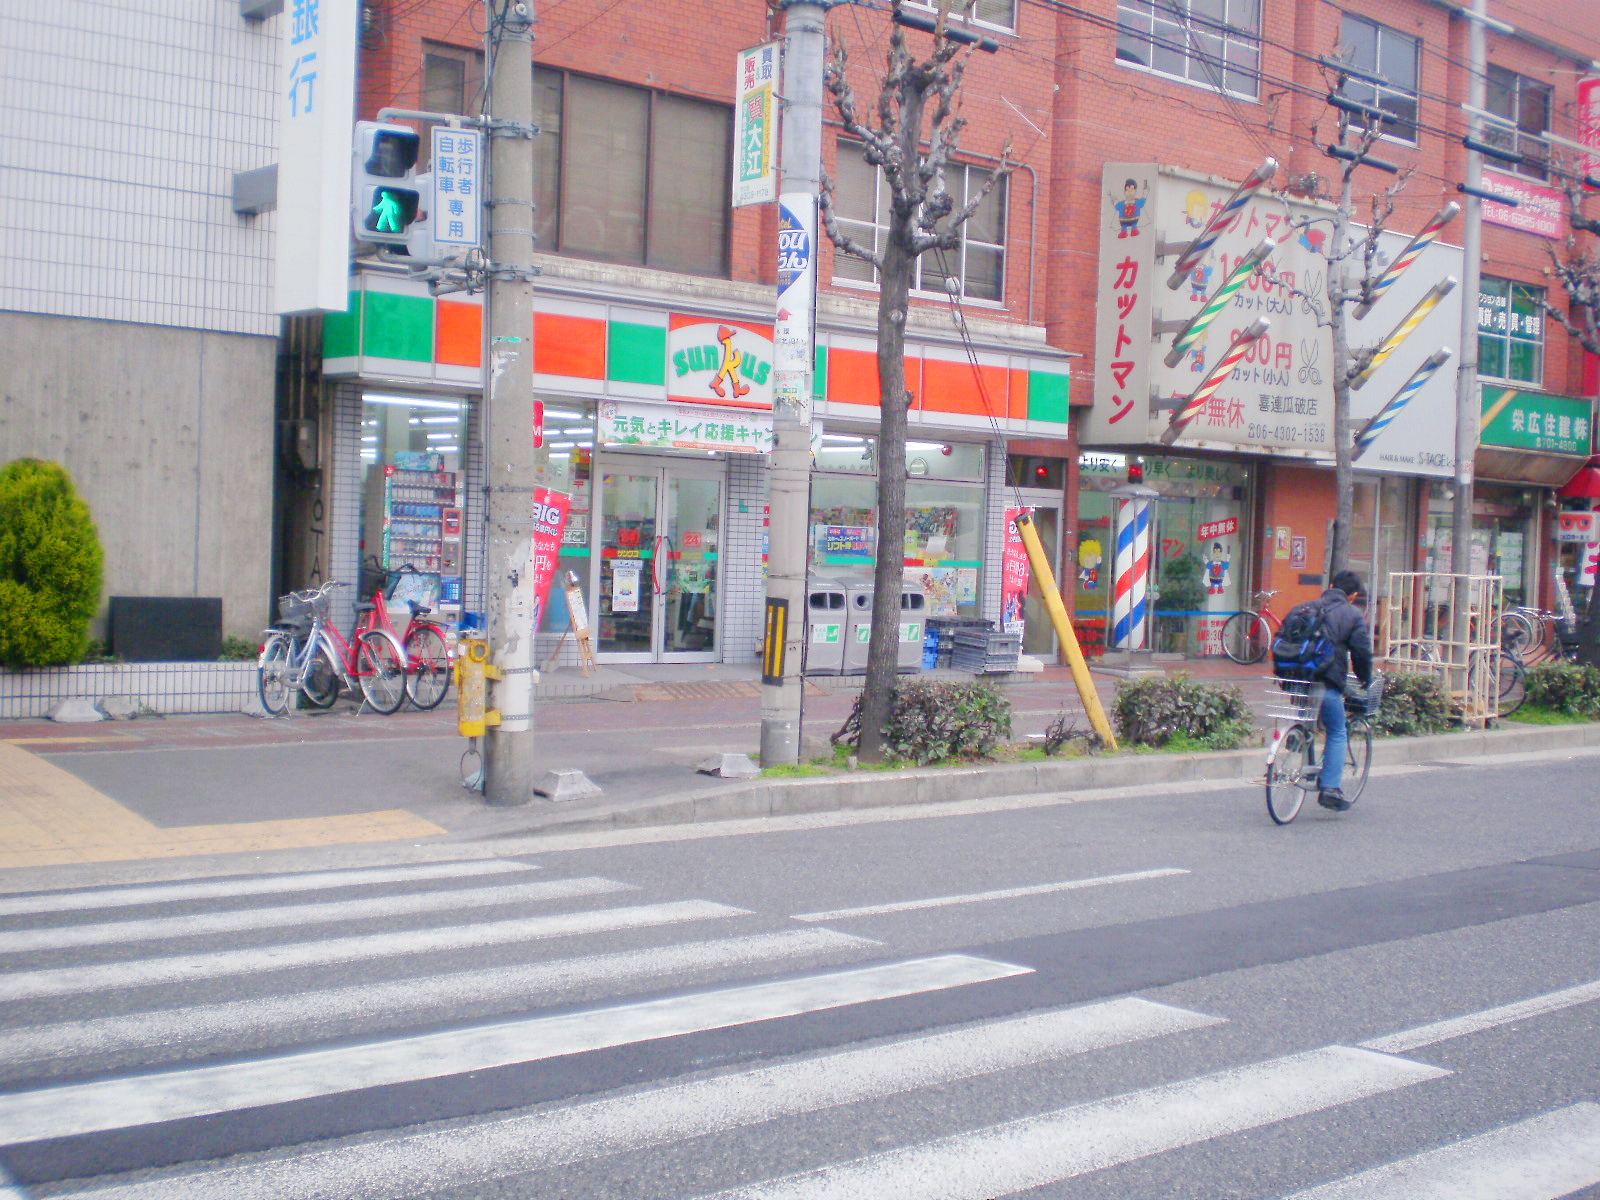 Convenience store. 127m until Thanksgiving Kire 2-chome (convenience store)